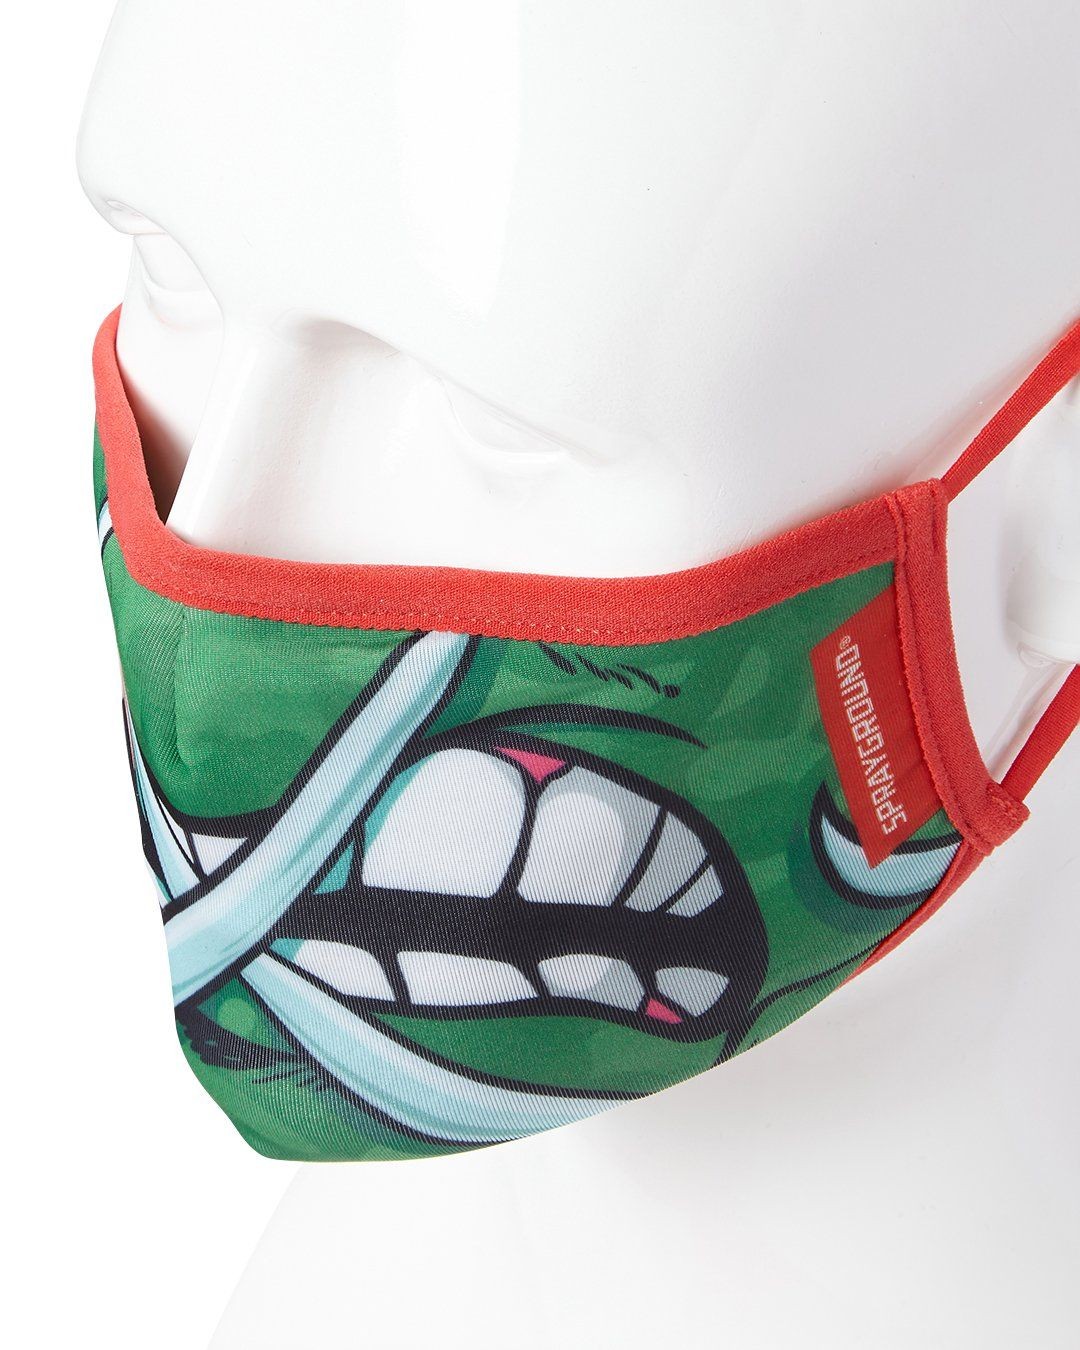 Discount | Adult Tmnt: Raphael Shark Form Fitting Face-Covering Sprayground Sale - Discount | Adult Tmnt: Raphael Shark Form Fitting Face-Covering Sprayground Sale-01-2